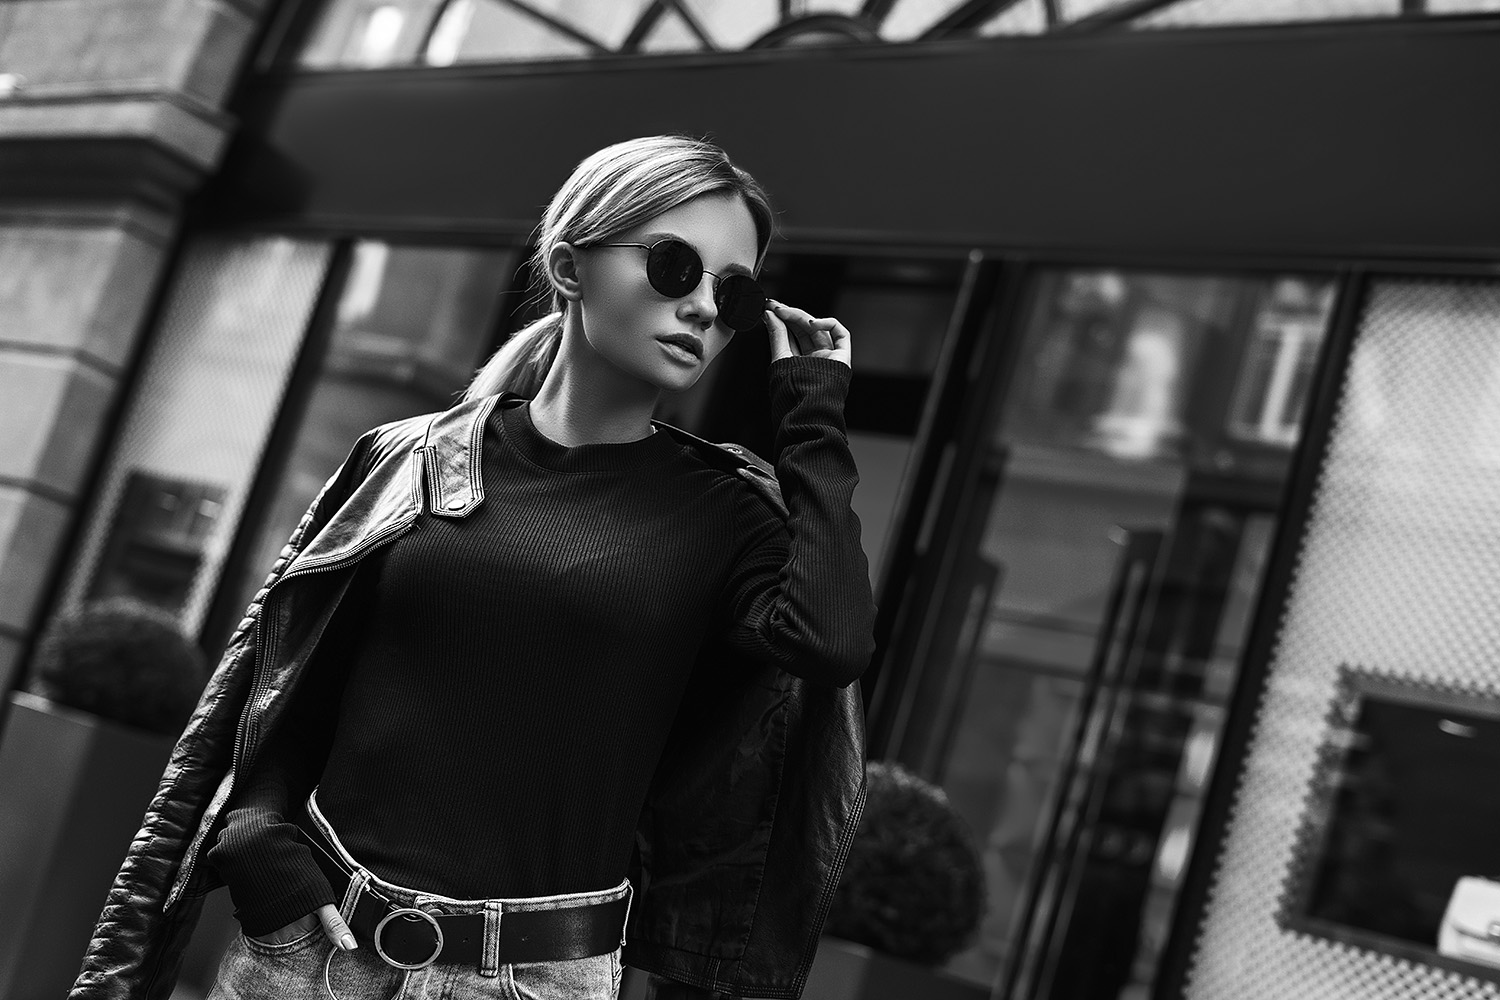 Fashion stylish woman in leather jacket, jeans, sweater and sunglasses walking on road on shops background. Elegant trendy outdoors portrait of pretty girl model on city street